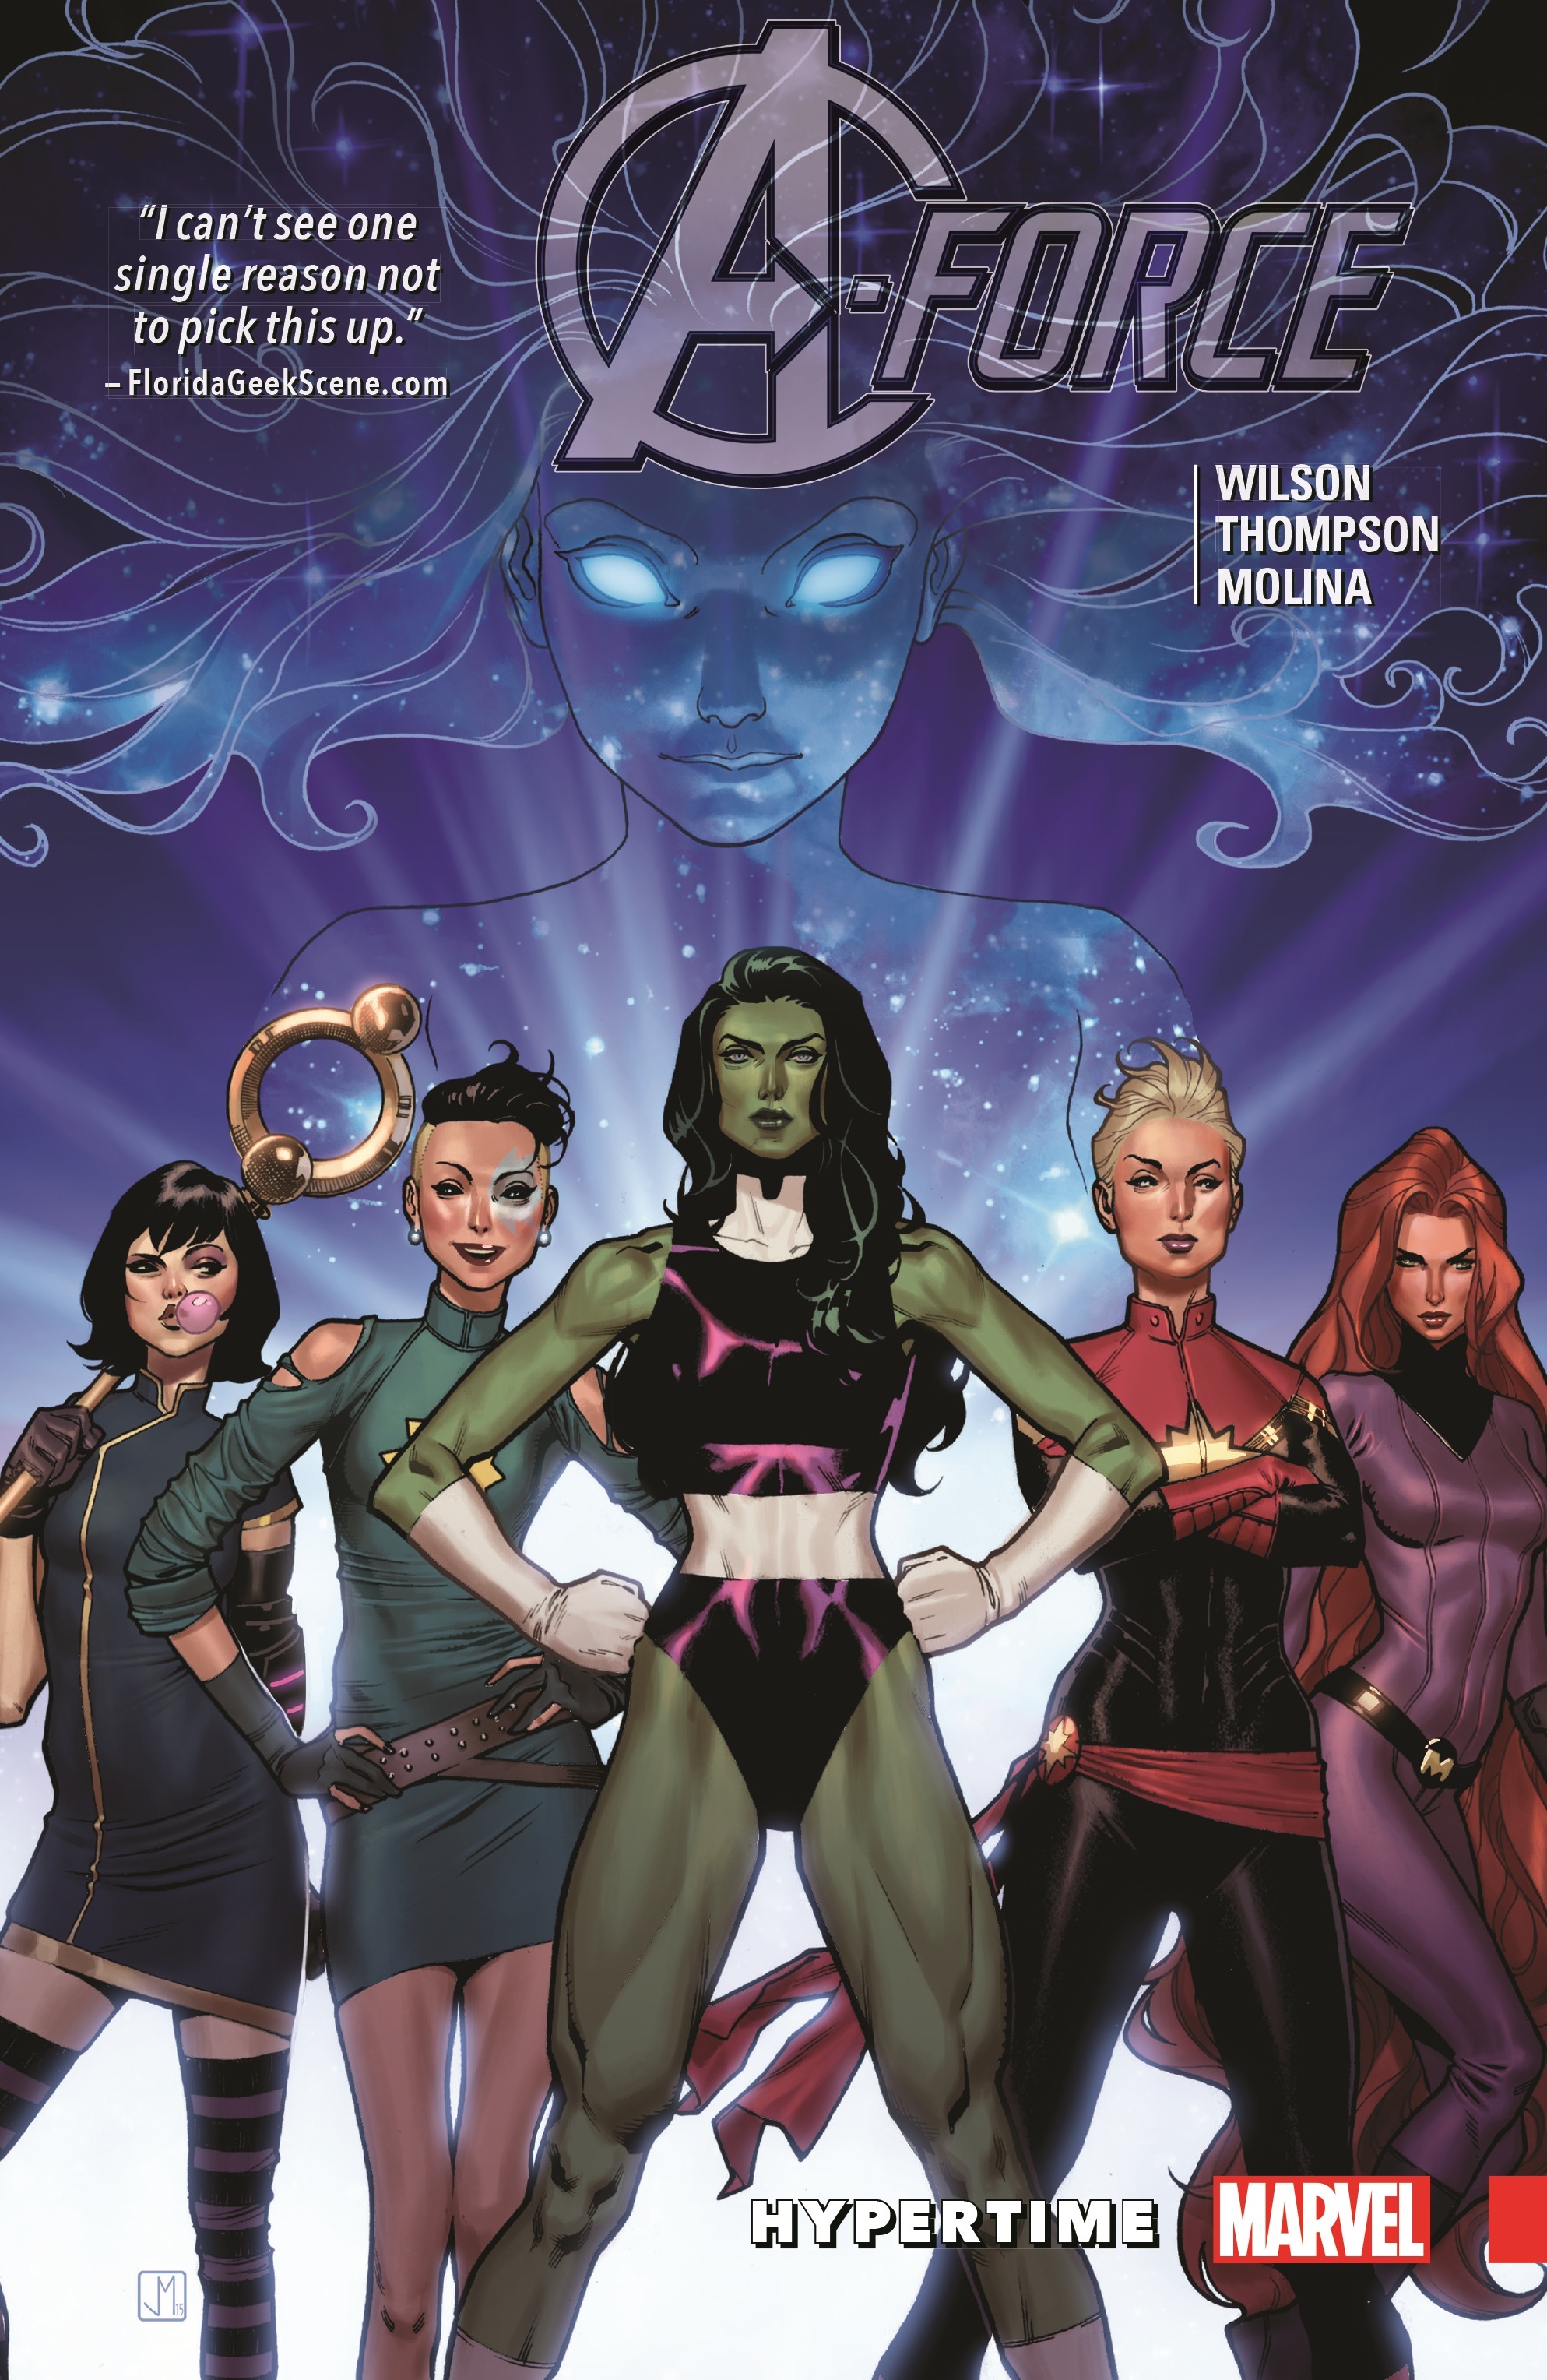 A-Force Vol. 1: Hypertime (Trade Paperback)